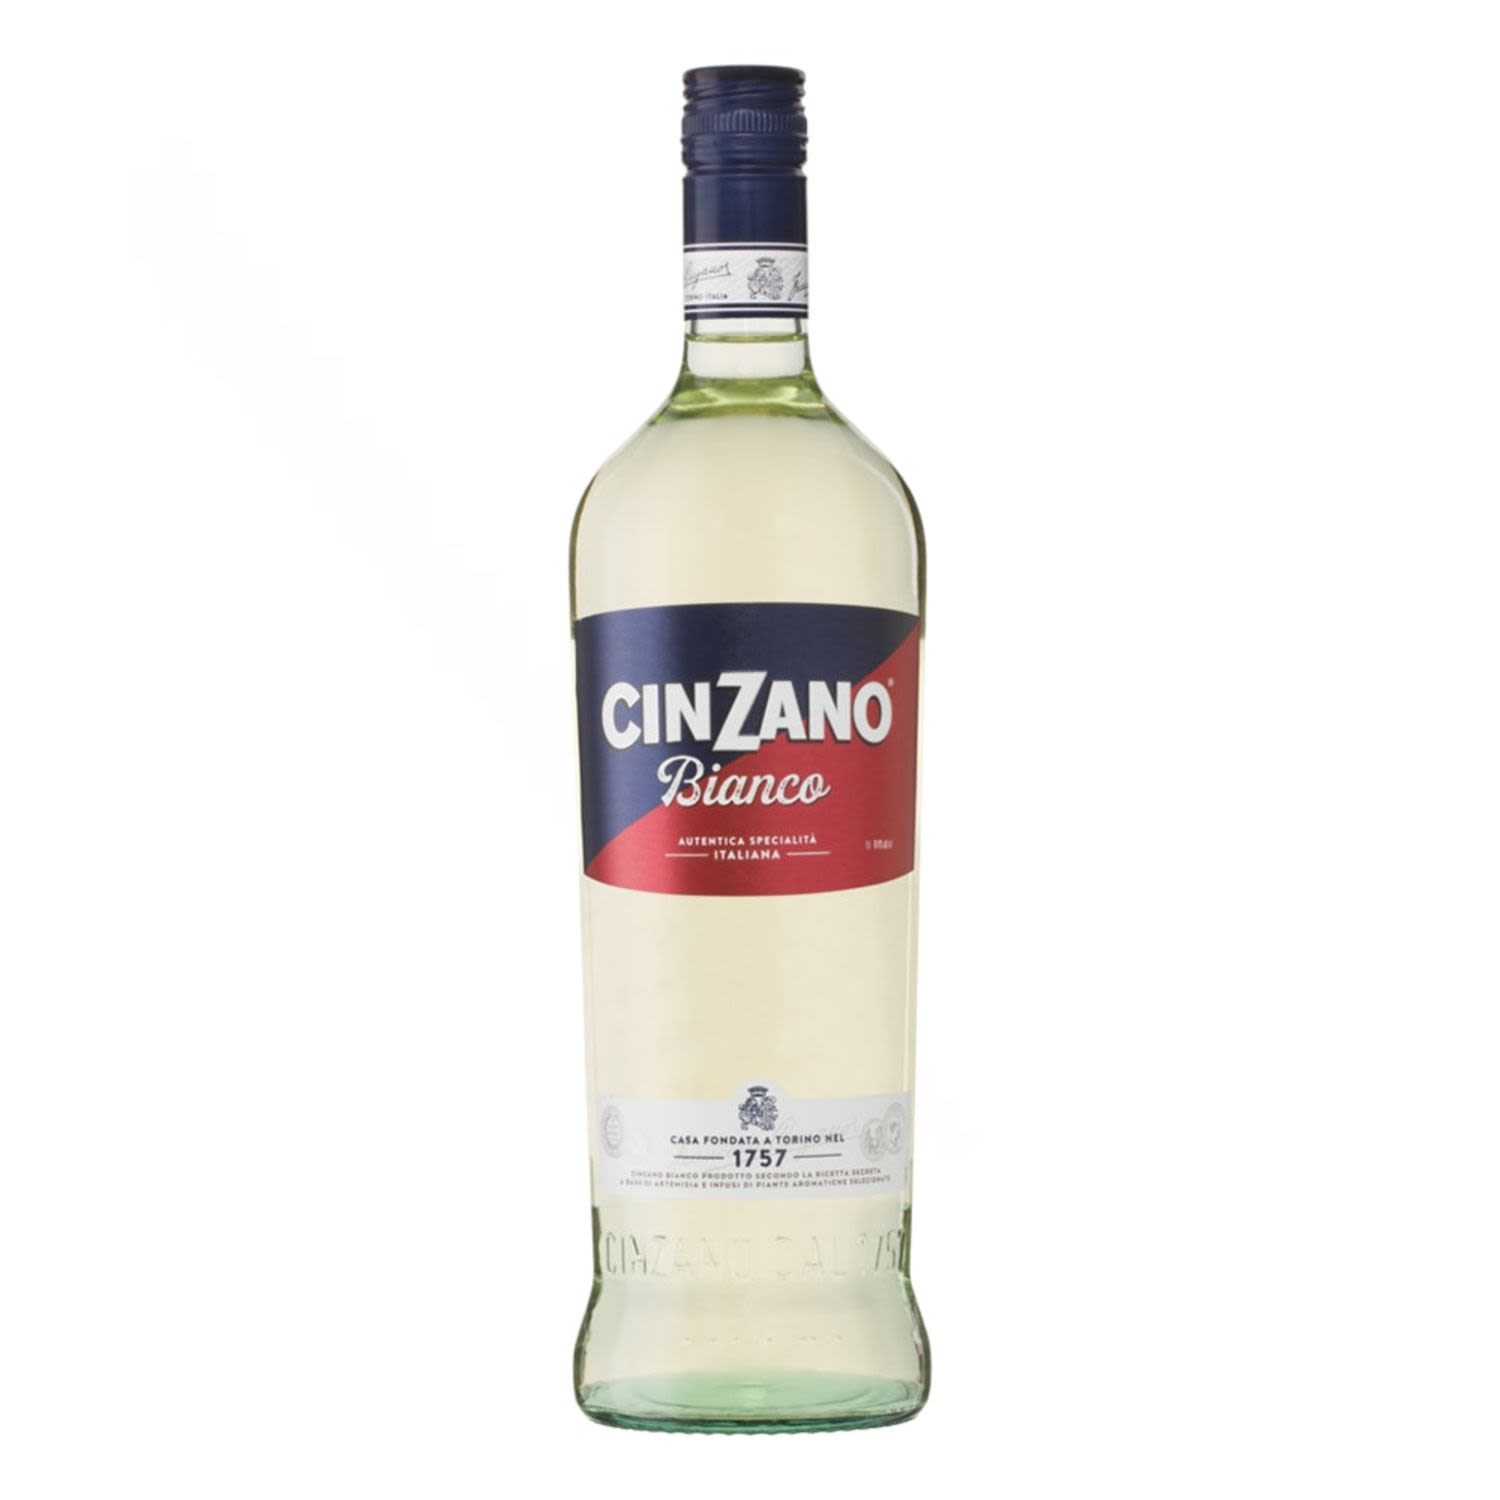 A light yellow vermouth with a fragrant, full-bodied and delicate aroma, Cinzano Bianco is sweet and extremely versatile. It can be enjoyed straight as an apéritif or as an ingredient in a cocktail, and is best served chilled.<br /> <br />Alcohol Volume: 14.40%<br /><br />Pack Format: Bottle<br /><br />Standard Drinks: 11.4</br /><br />Pack Type: Bottle<br /><br />Country of Origin: Italy<br /><br />Region: Piedmont<br /><br />Vintage: Non Vintage<br />